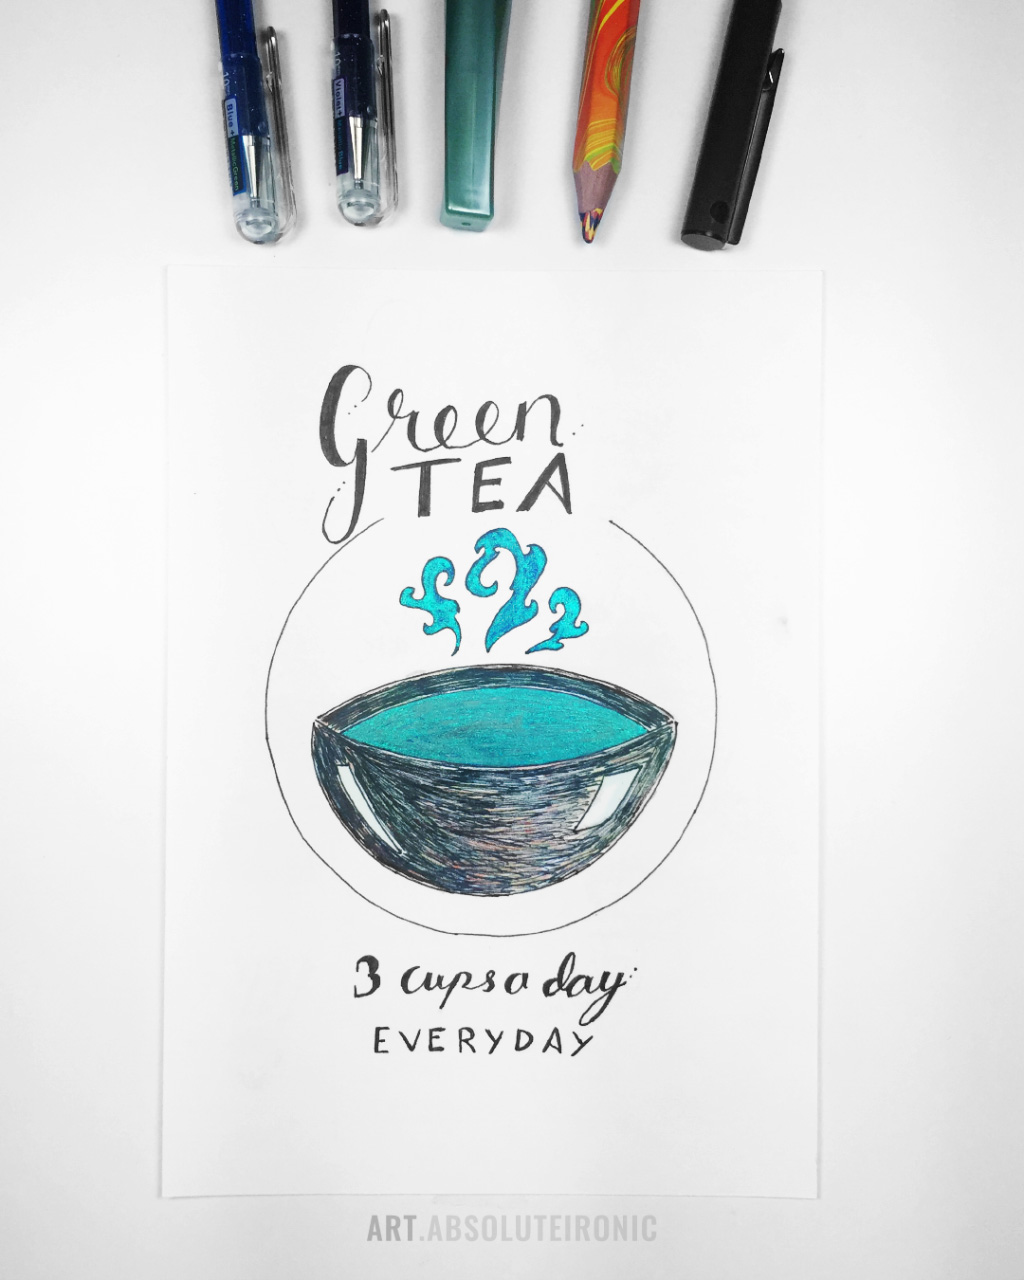 Doodle of a cup of green tea